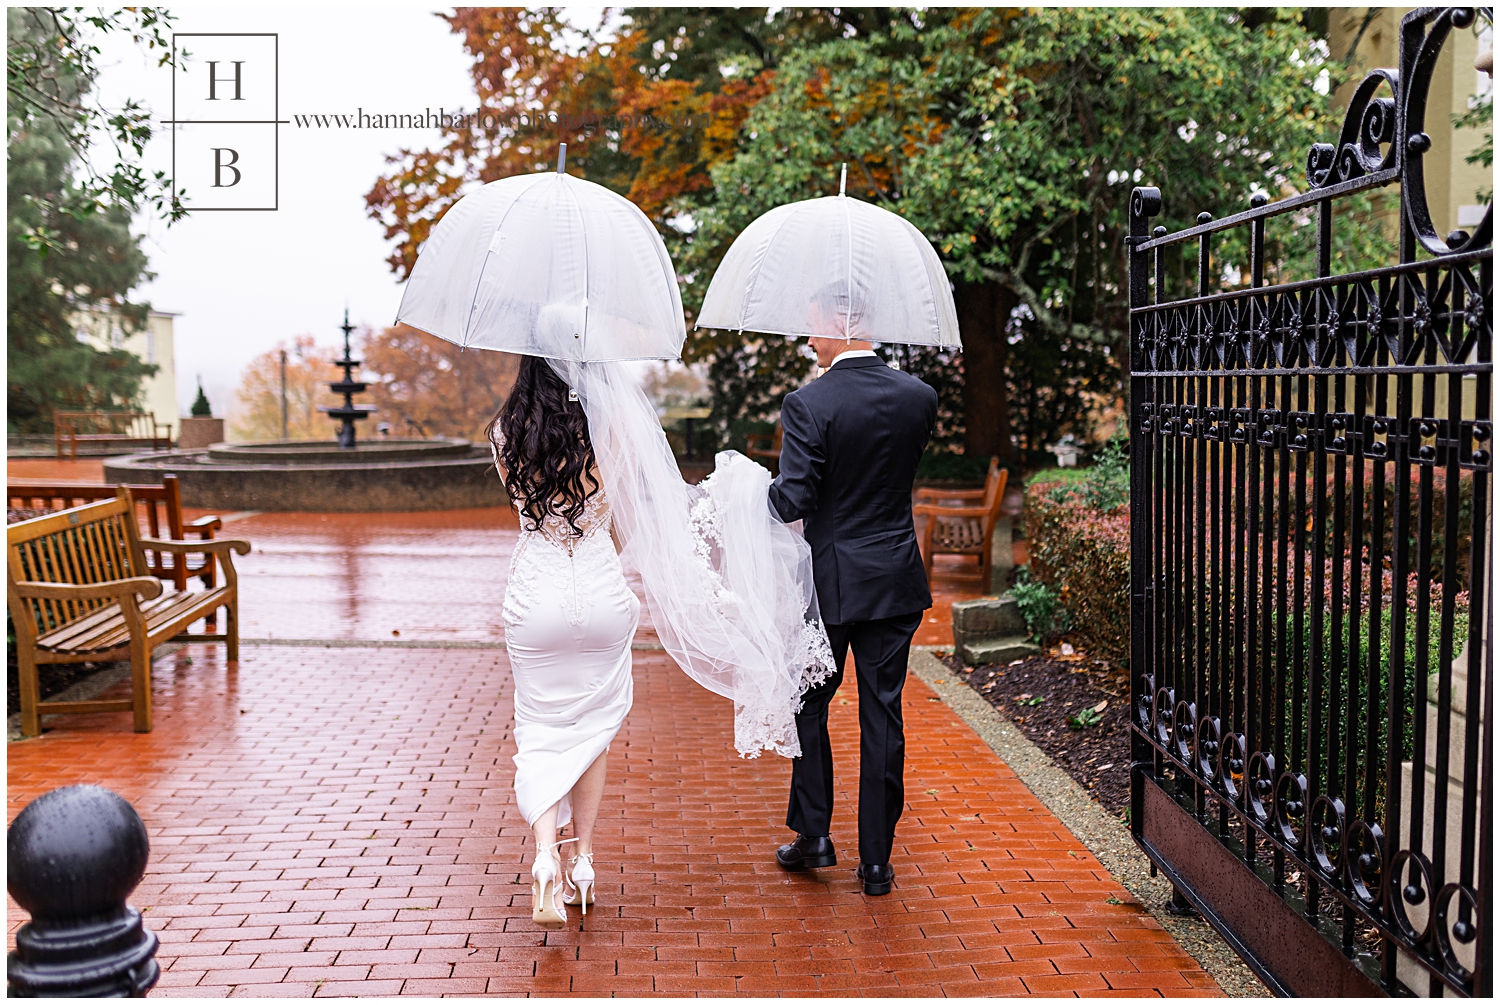 Bride and groom carry umbrellas while walking in the rain